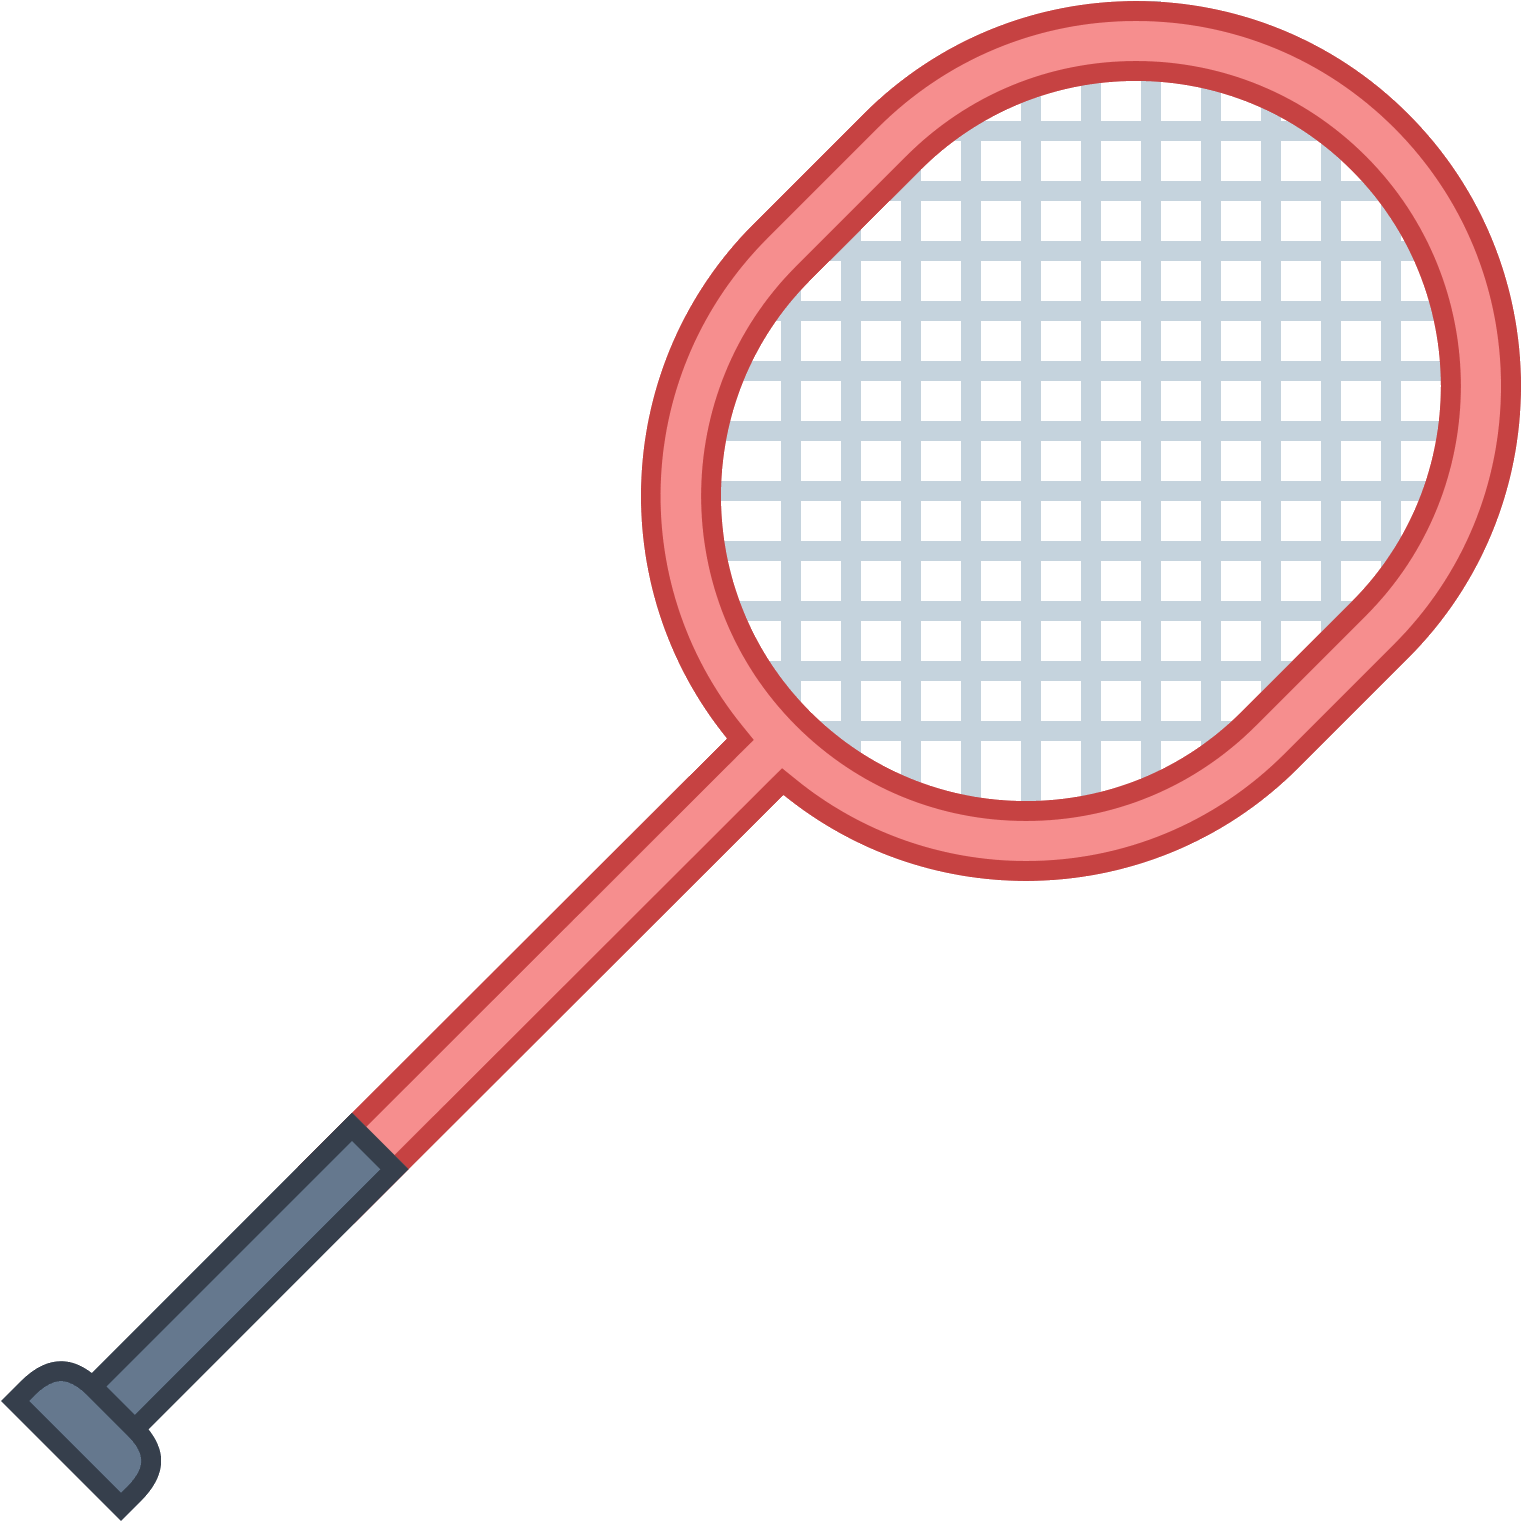 The Icon Looks Like An Outlined Tennis Racket Shape - Шторки На Заднее Стекло (1600x1600), Png Download